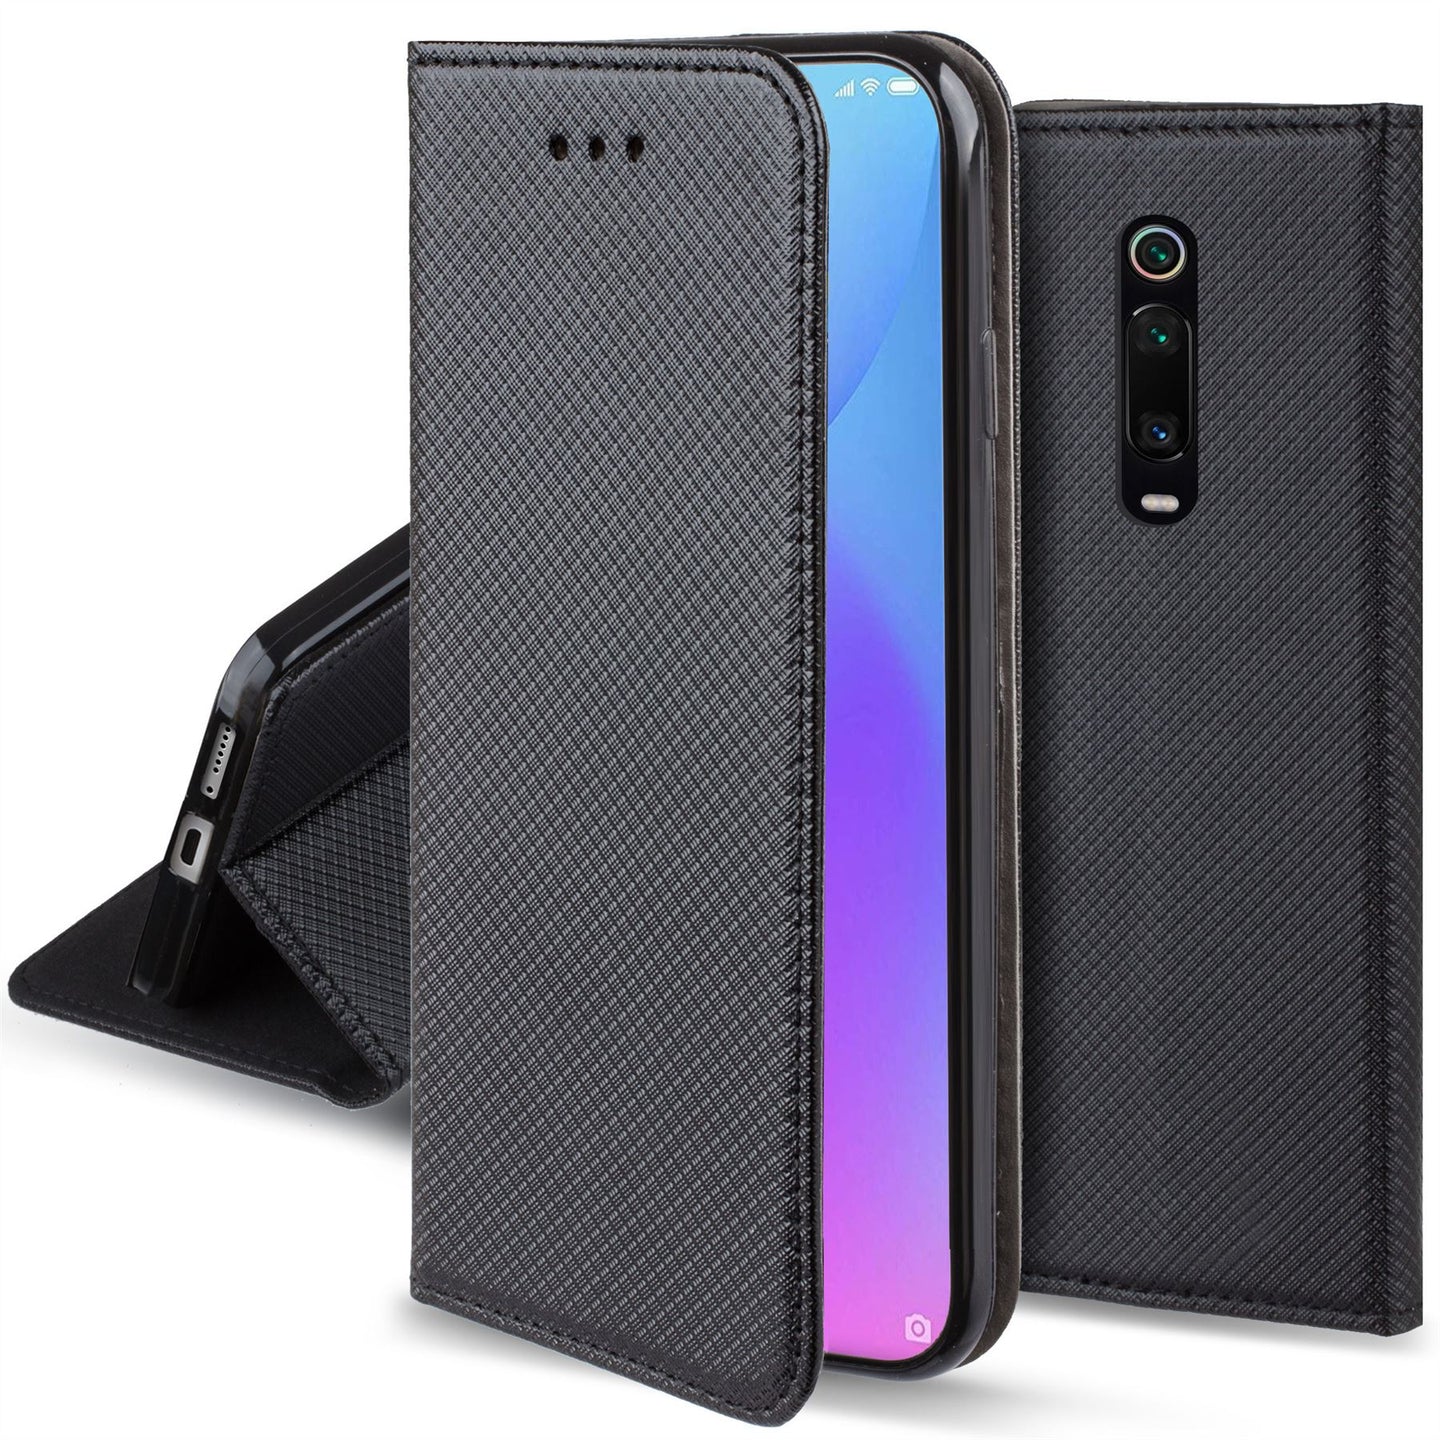 Moozy Case Flip Cover for Xiaomi Mi 9T, Xiaomi Mi 9T Pro, Redmi K20, Black - Smart Magnetic Flip Case with Card Holder and Stand